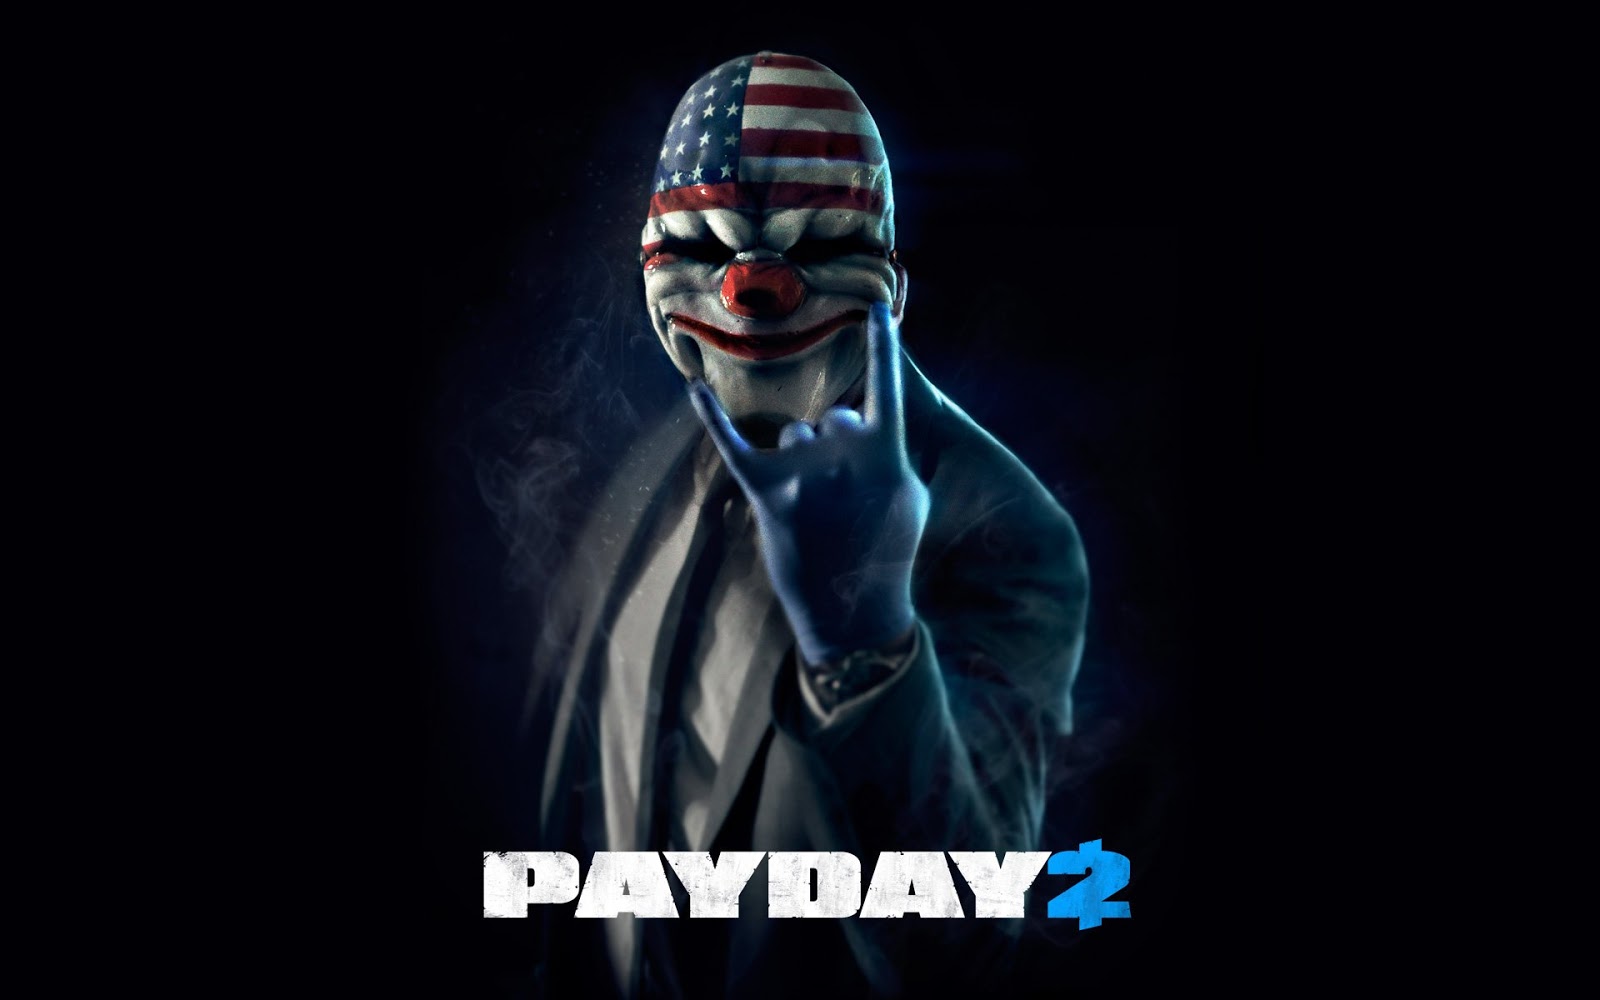 payday 2 pc highly compressed